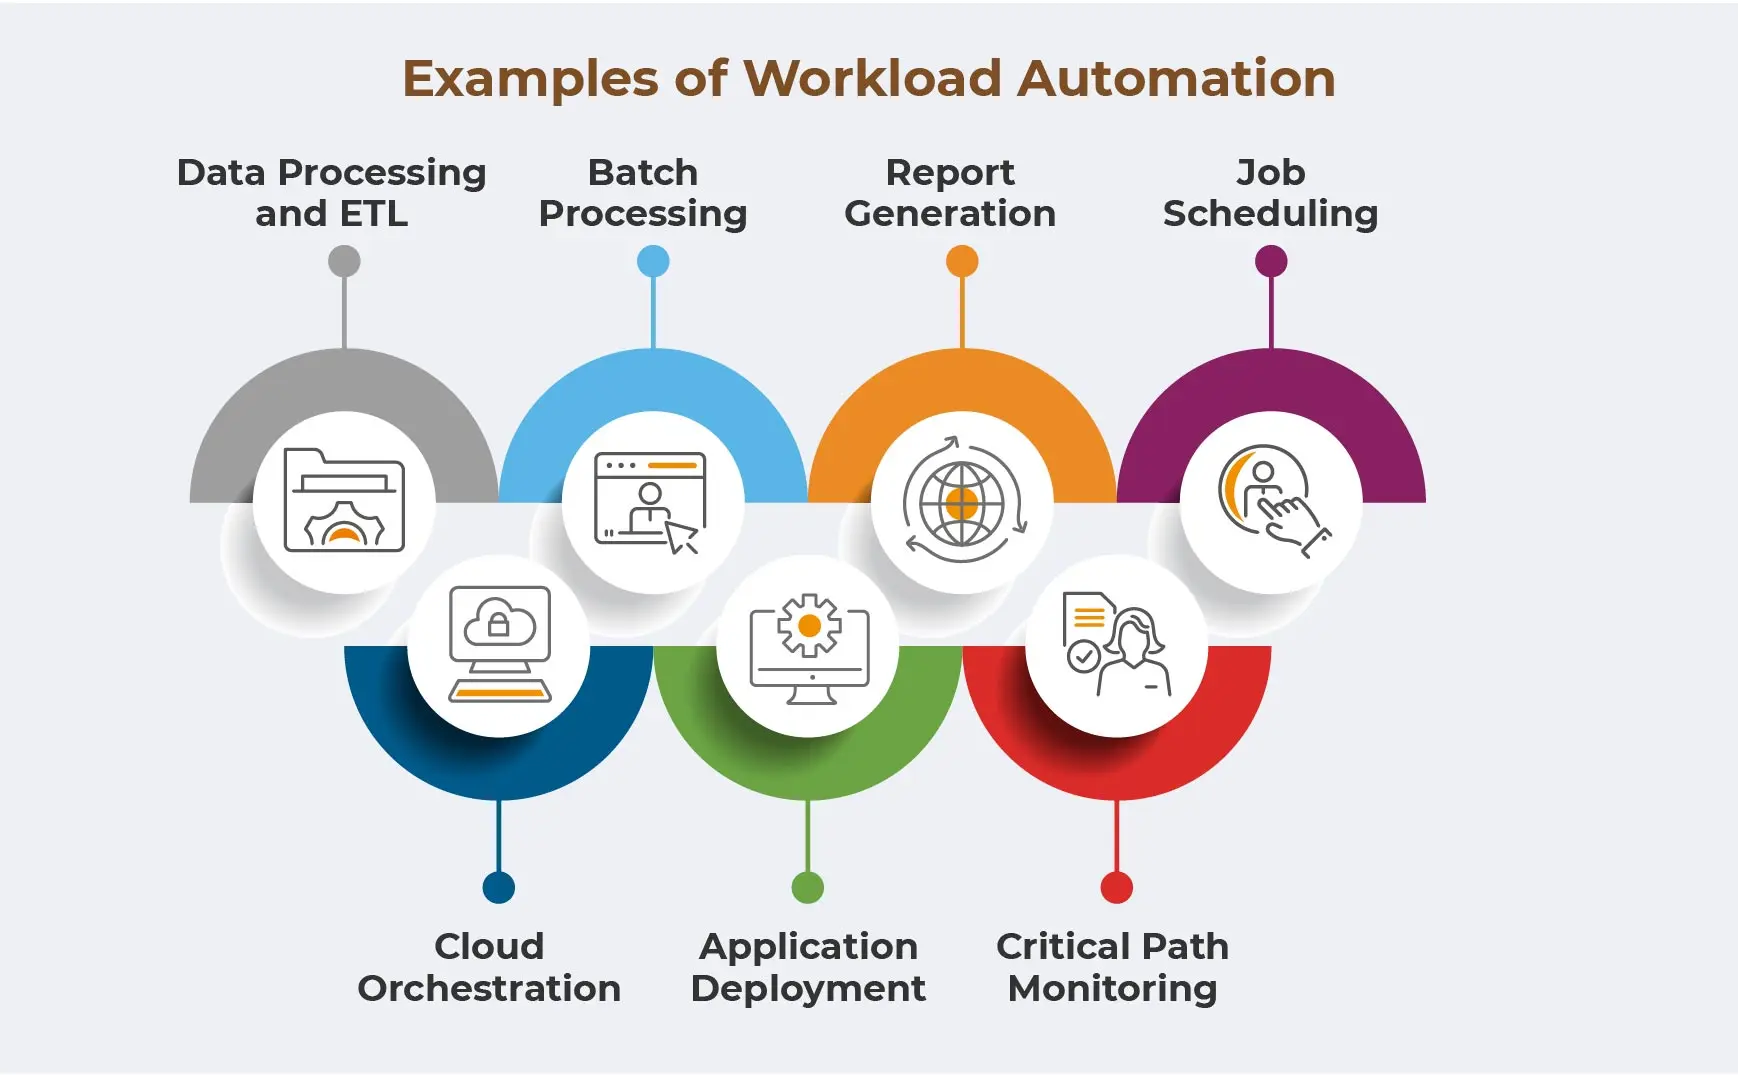 Examples of Workload Automation